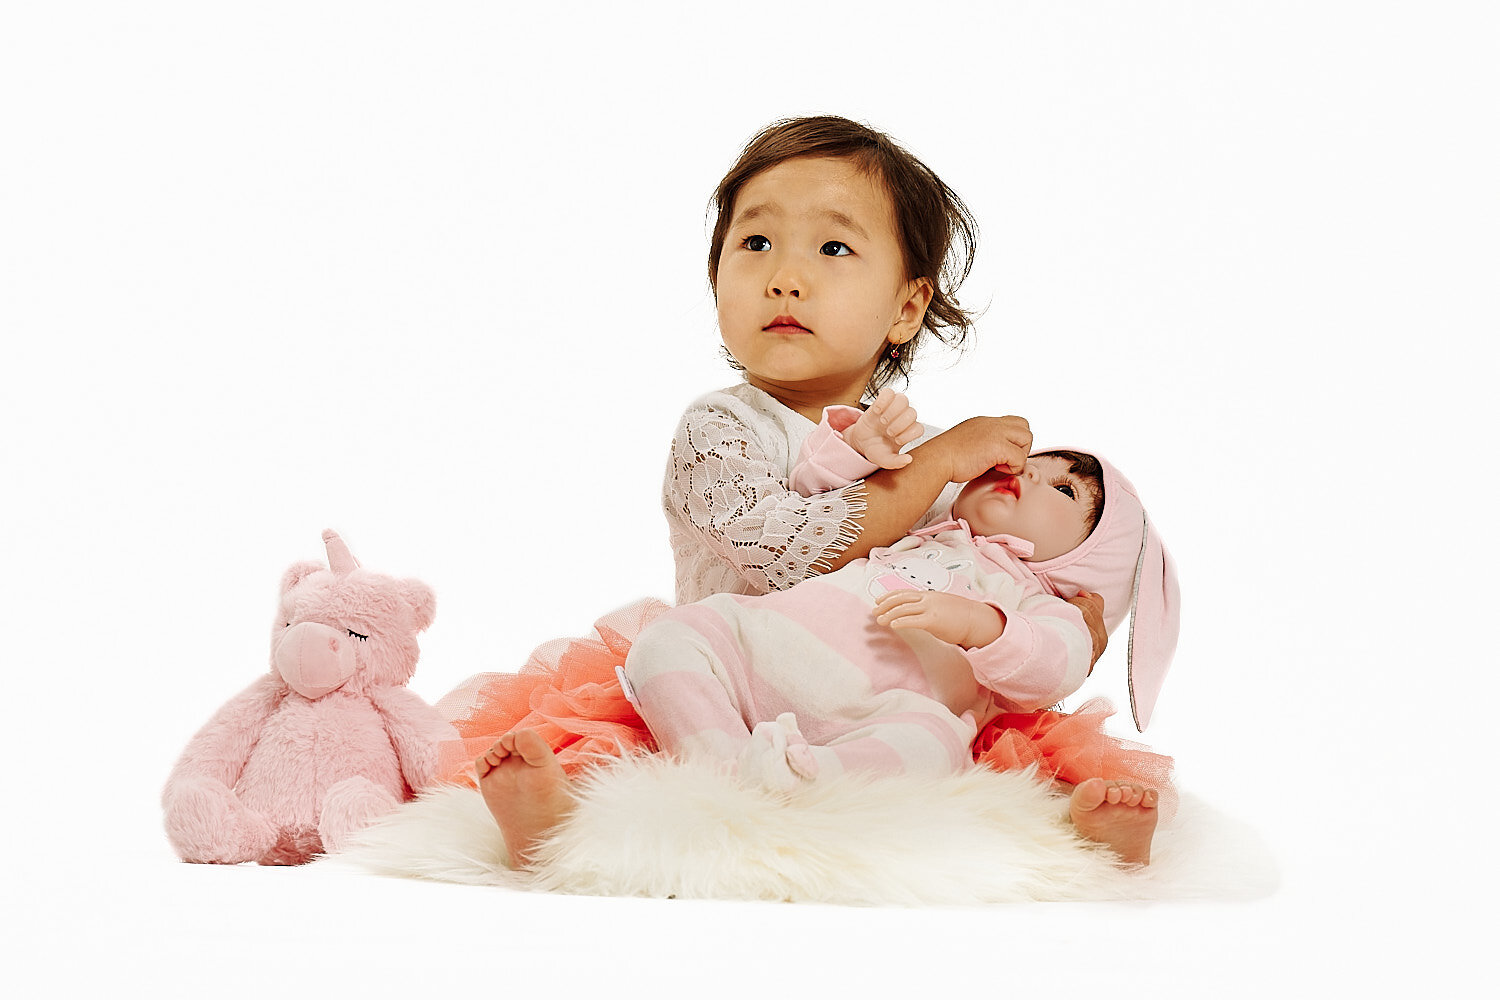  Gulmira Azamatova is posing for her 2nd birthday photos with her mother Nuriza Dobutova and her father Azamat Anapiiaev and her favorite toys. They are in a pro photo studio with white background. 